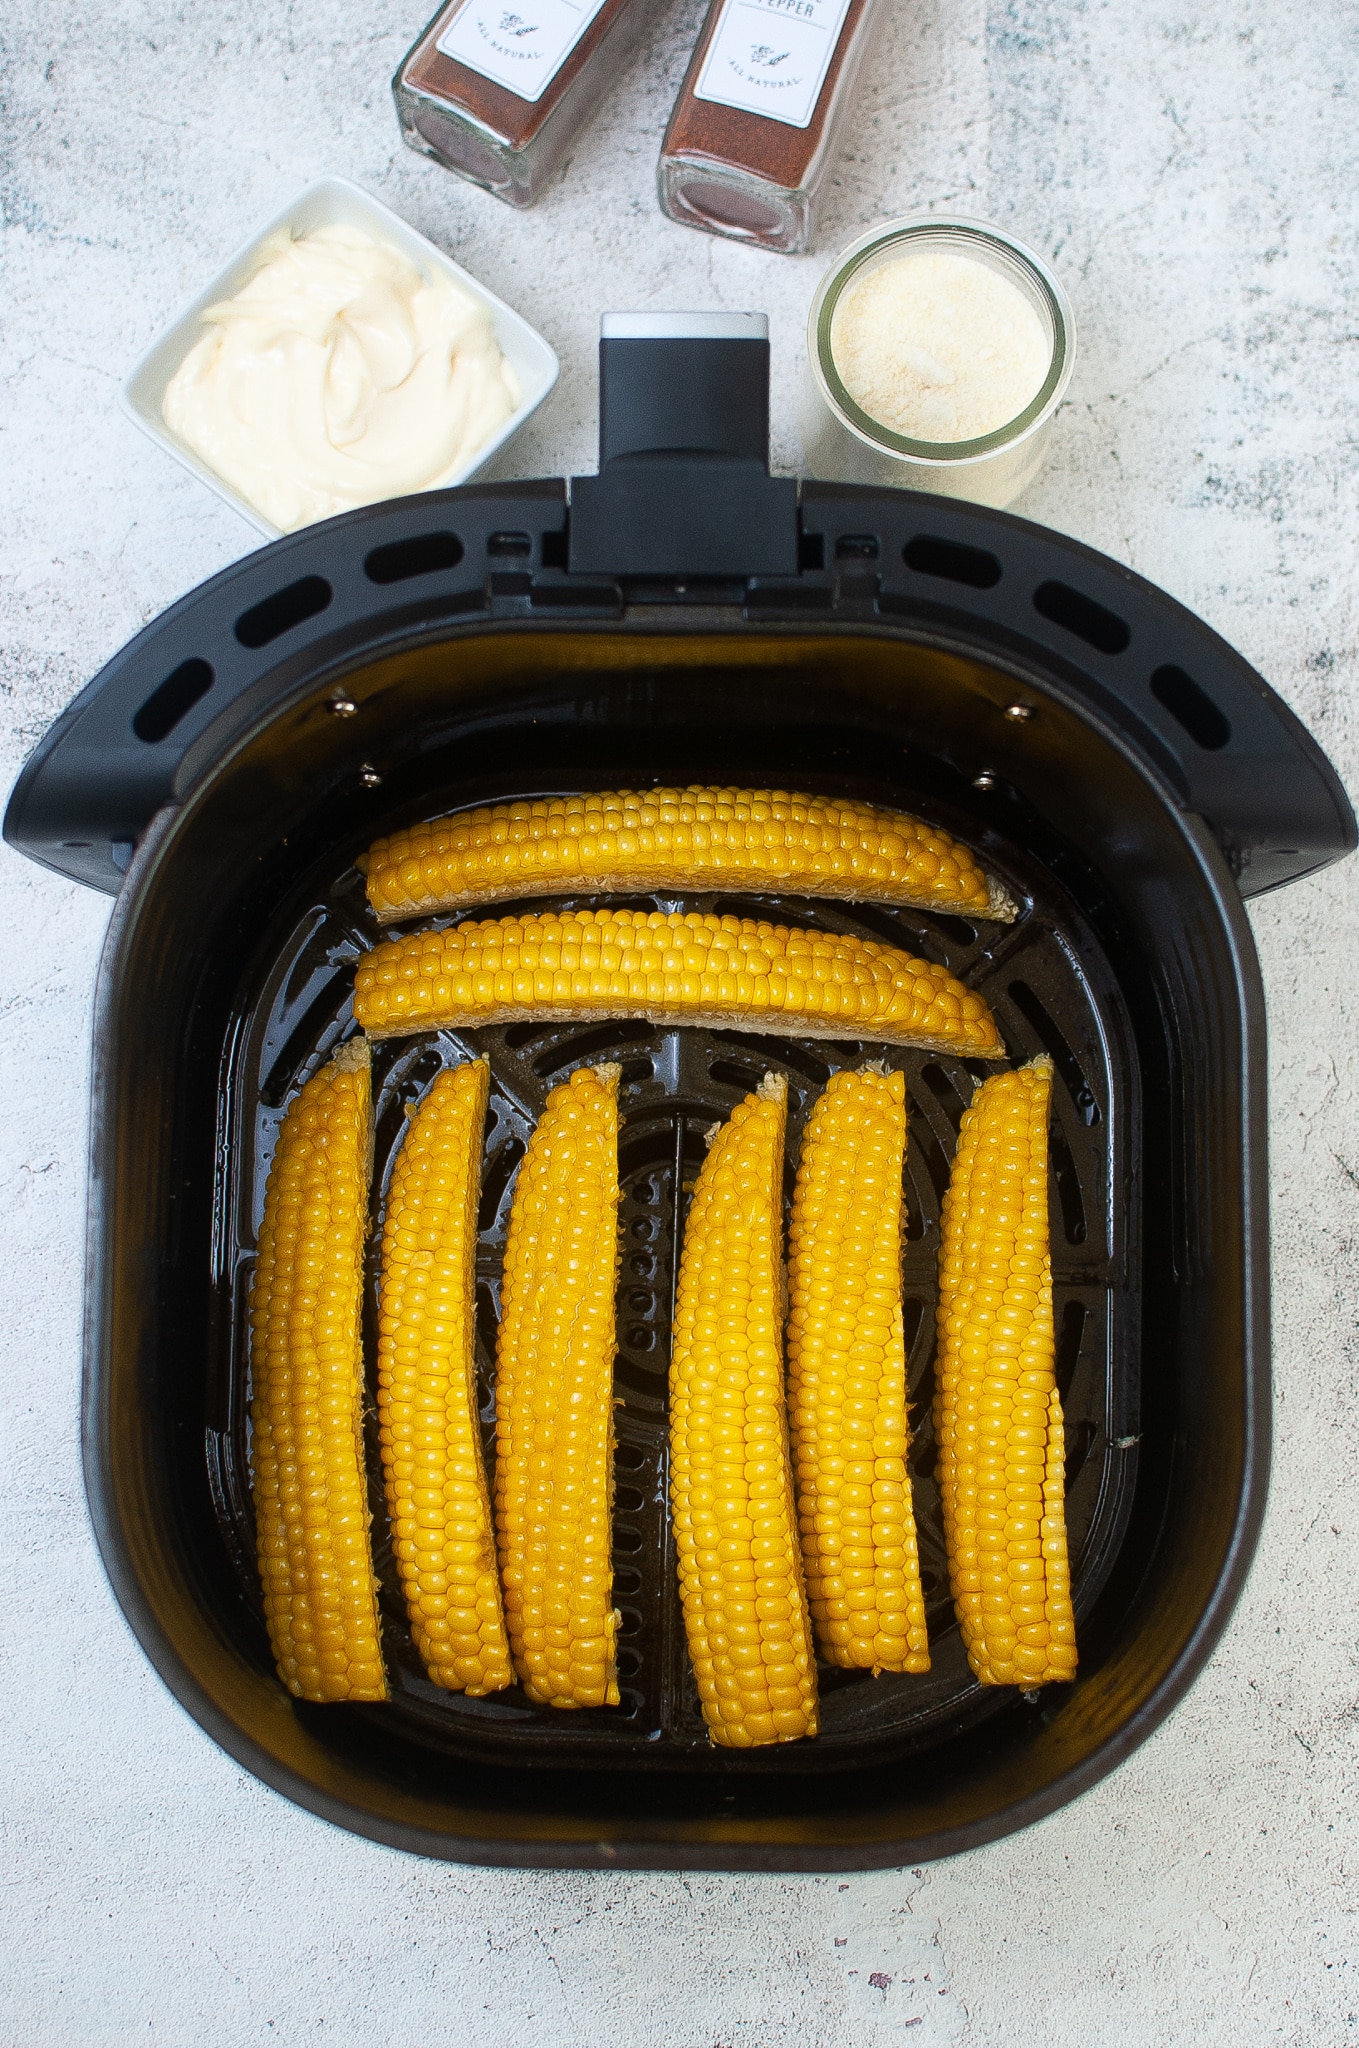 ribs spread out in an air fryer basket